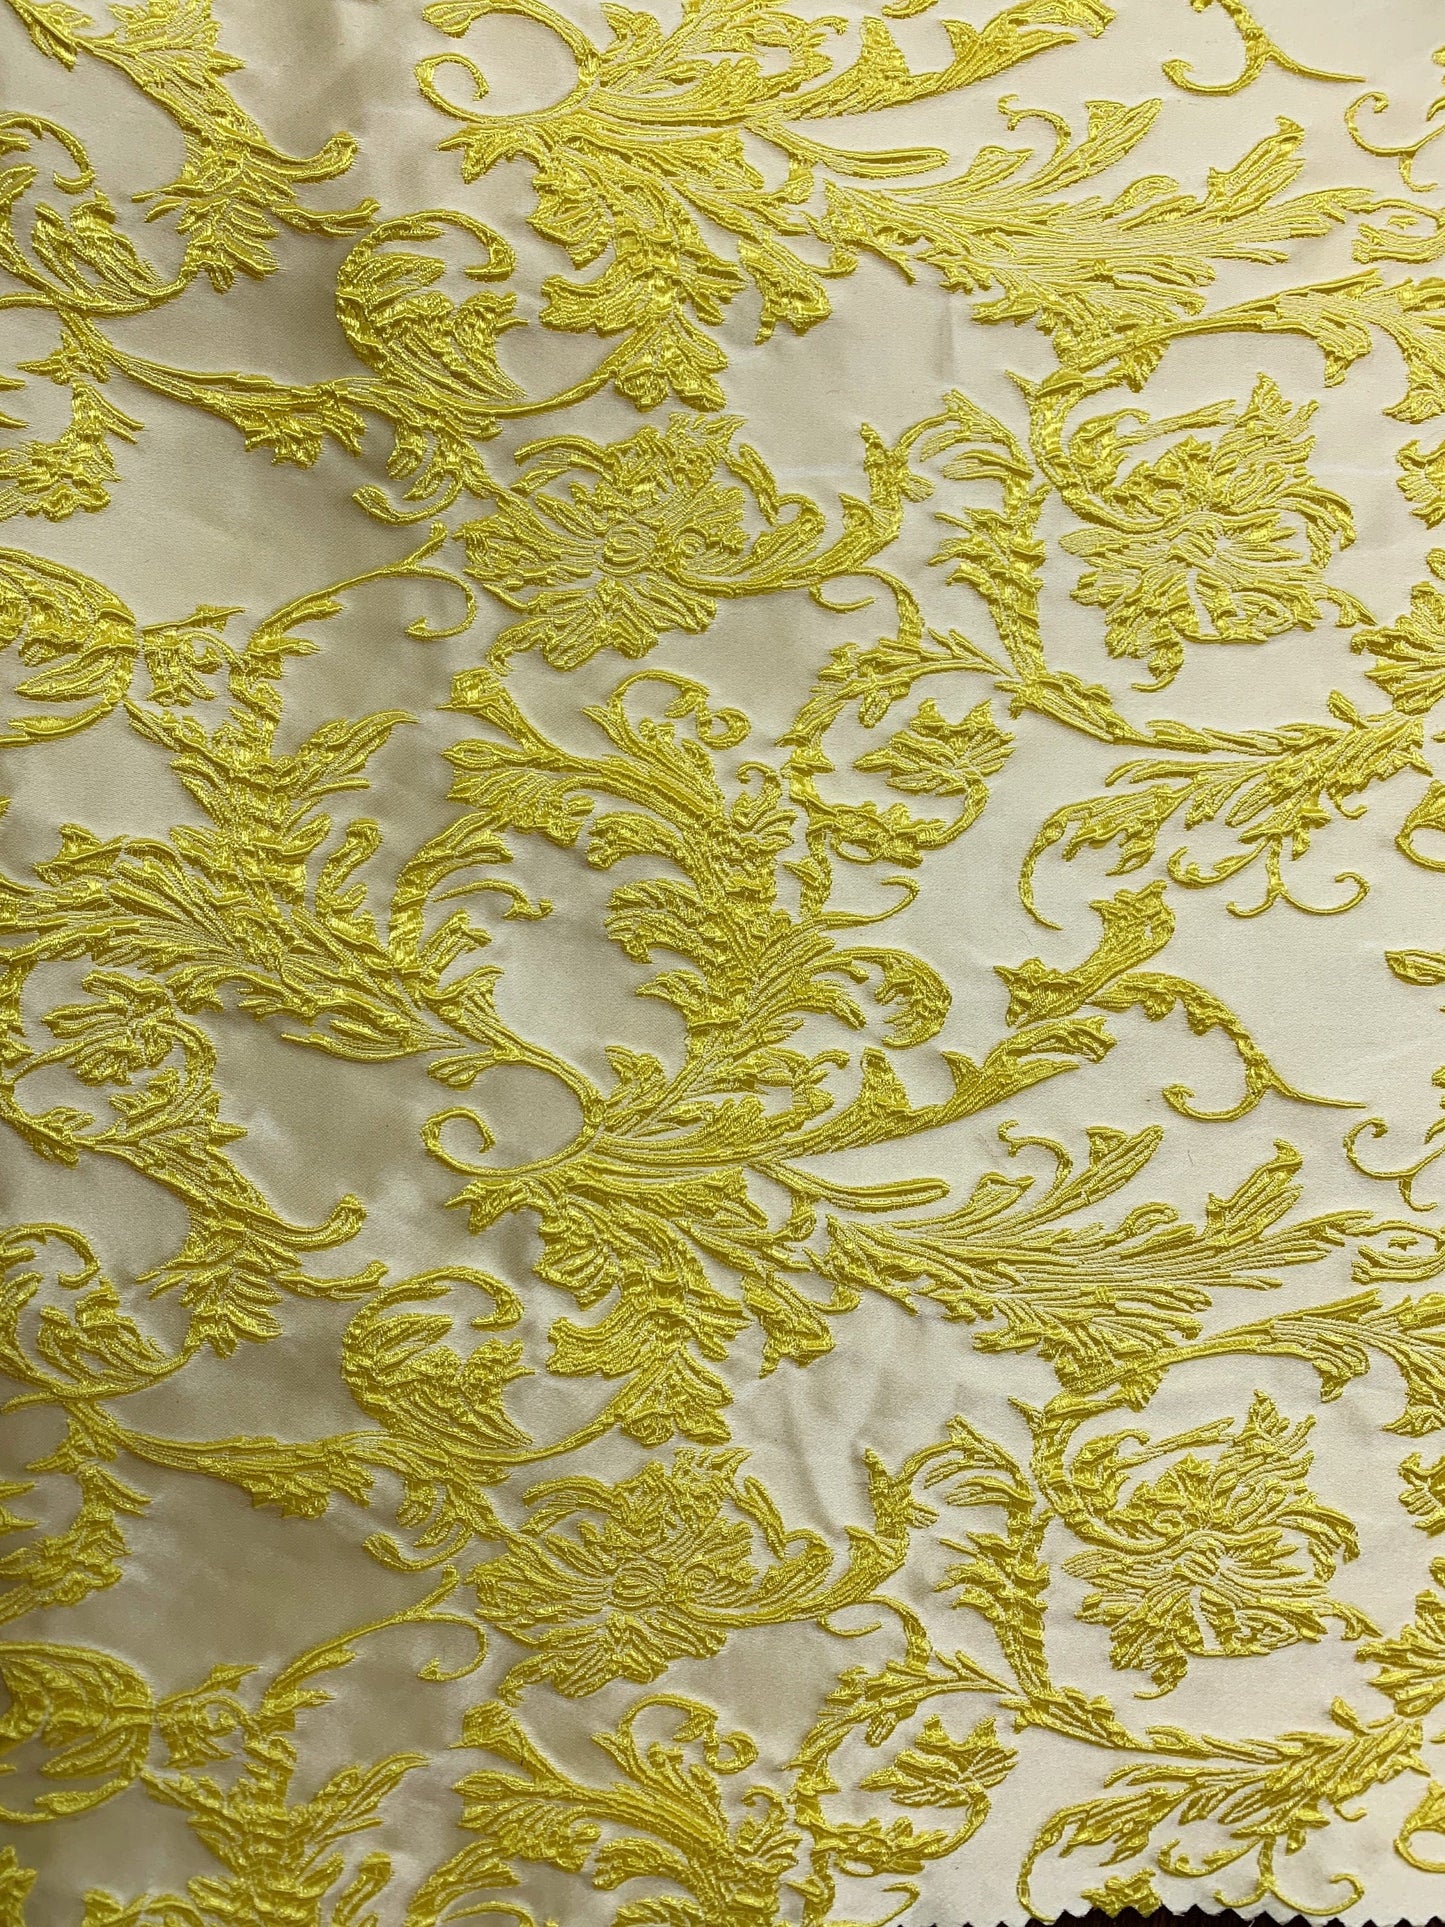 YELLOW Floral Brocade Fabric (60 in.) Sold By The Yard